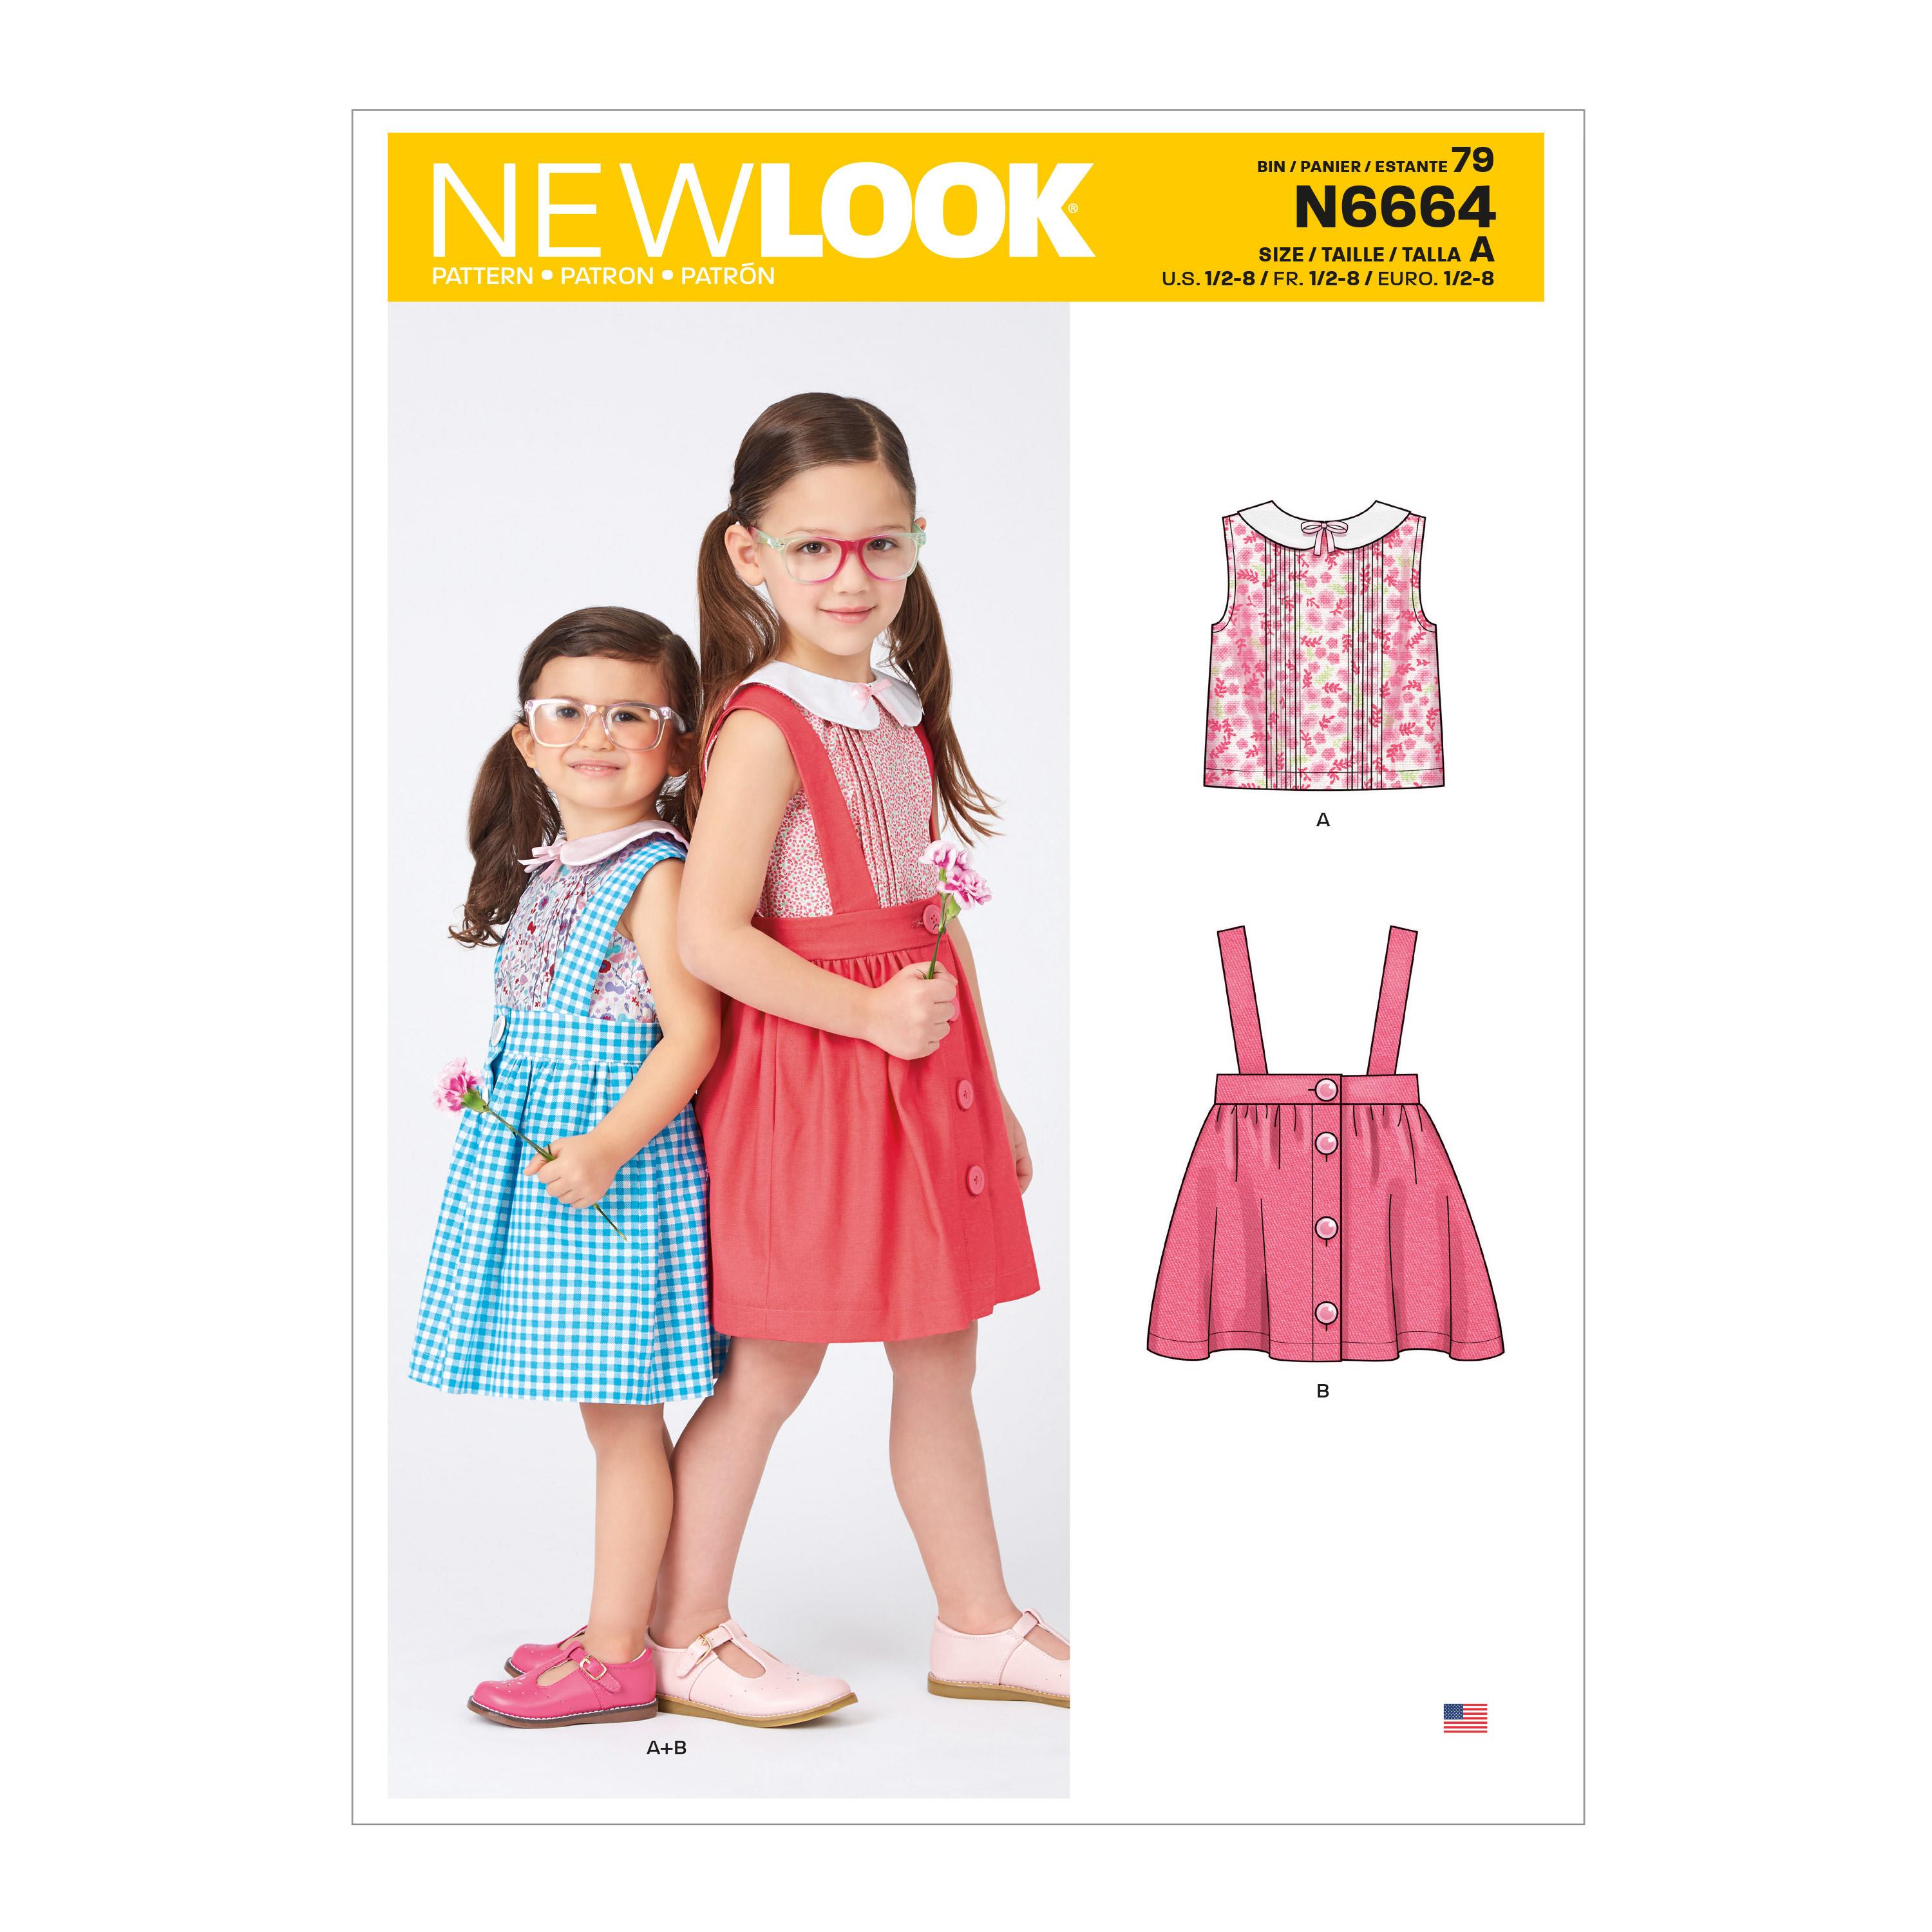 New Look Sewing Pattern N6664 Toddlers' & Children's Skirts With Shoulder Straps & Peter Pan Blouse